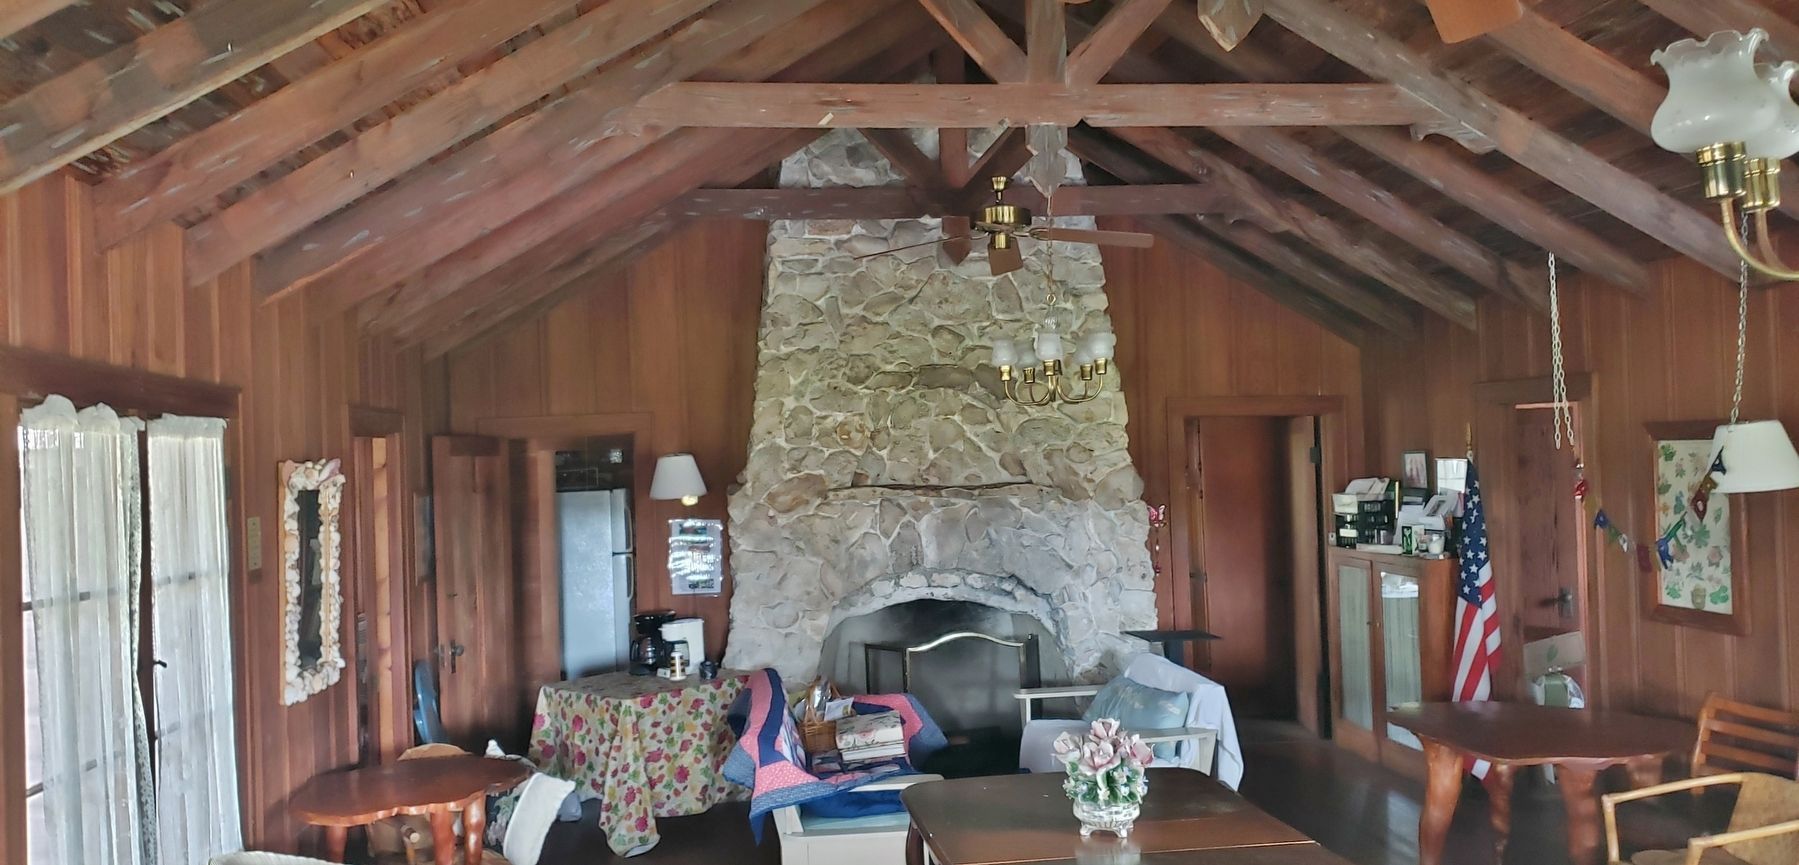 Garden Center Interior (<i>stone fireplace; cypress furniture, walls and rafters</i>) image. Click for full size.